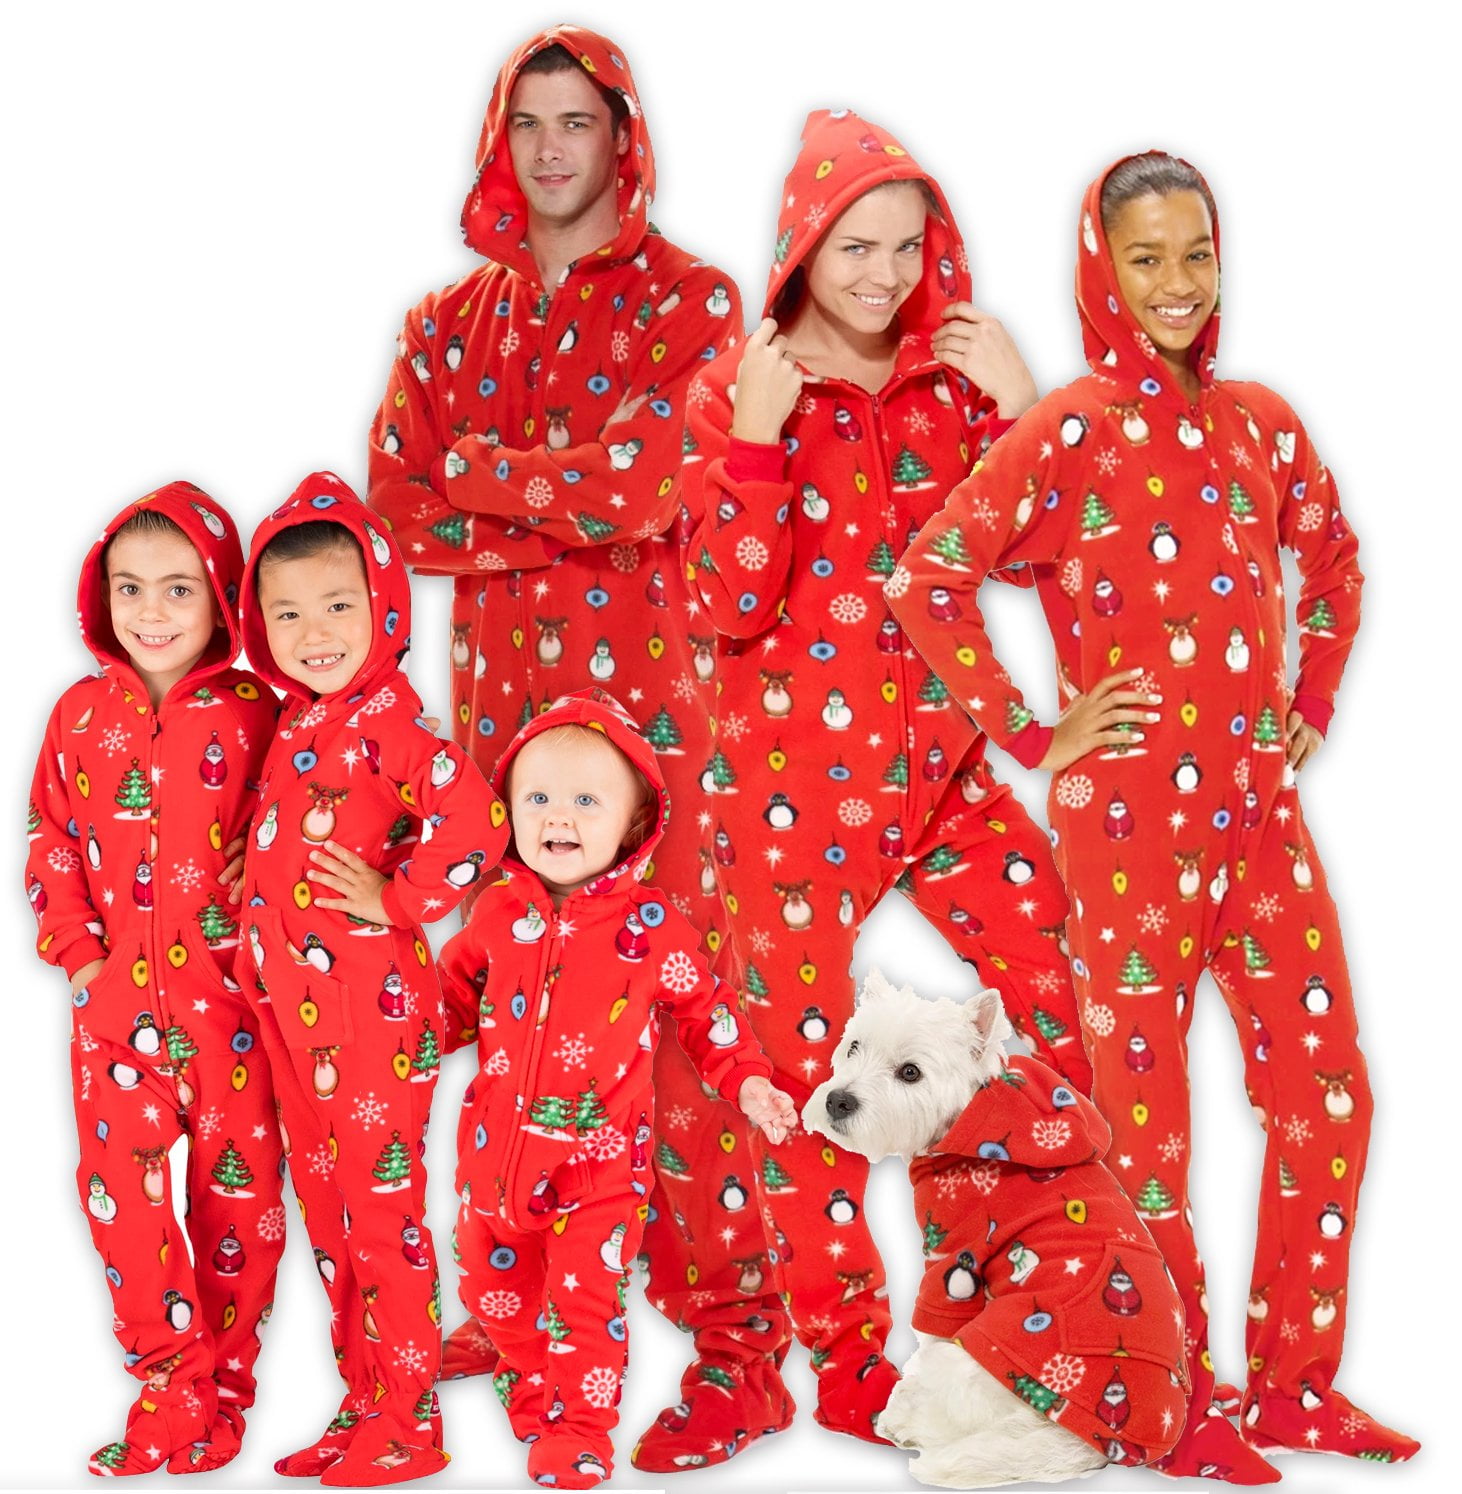 Flannel Hooded Zip Up One Piece Sleepwear for Womens Mens Boys Girls Babies Dogs Christmas Holiday Family Matching Pajamas Sets